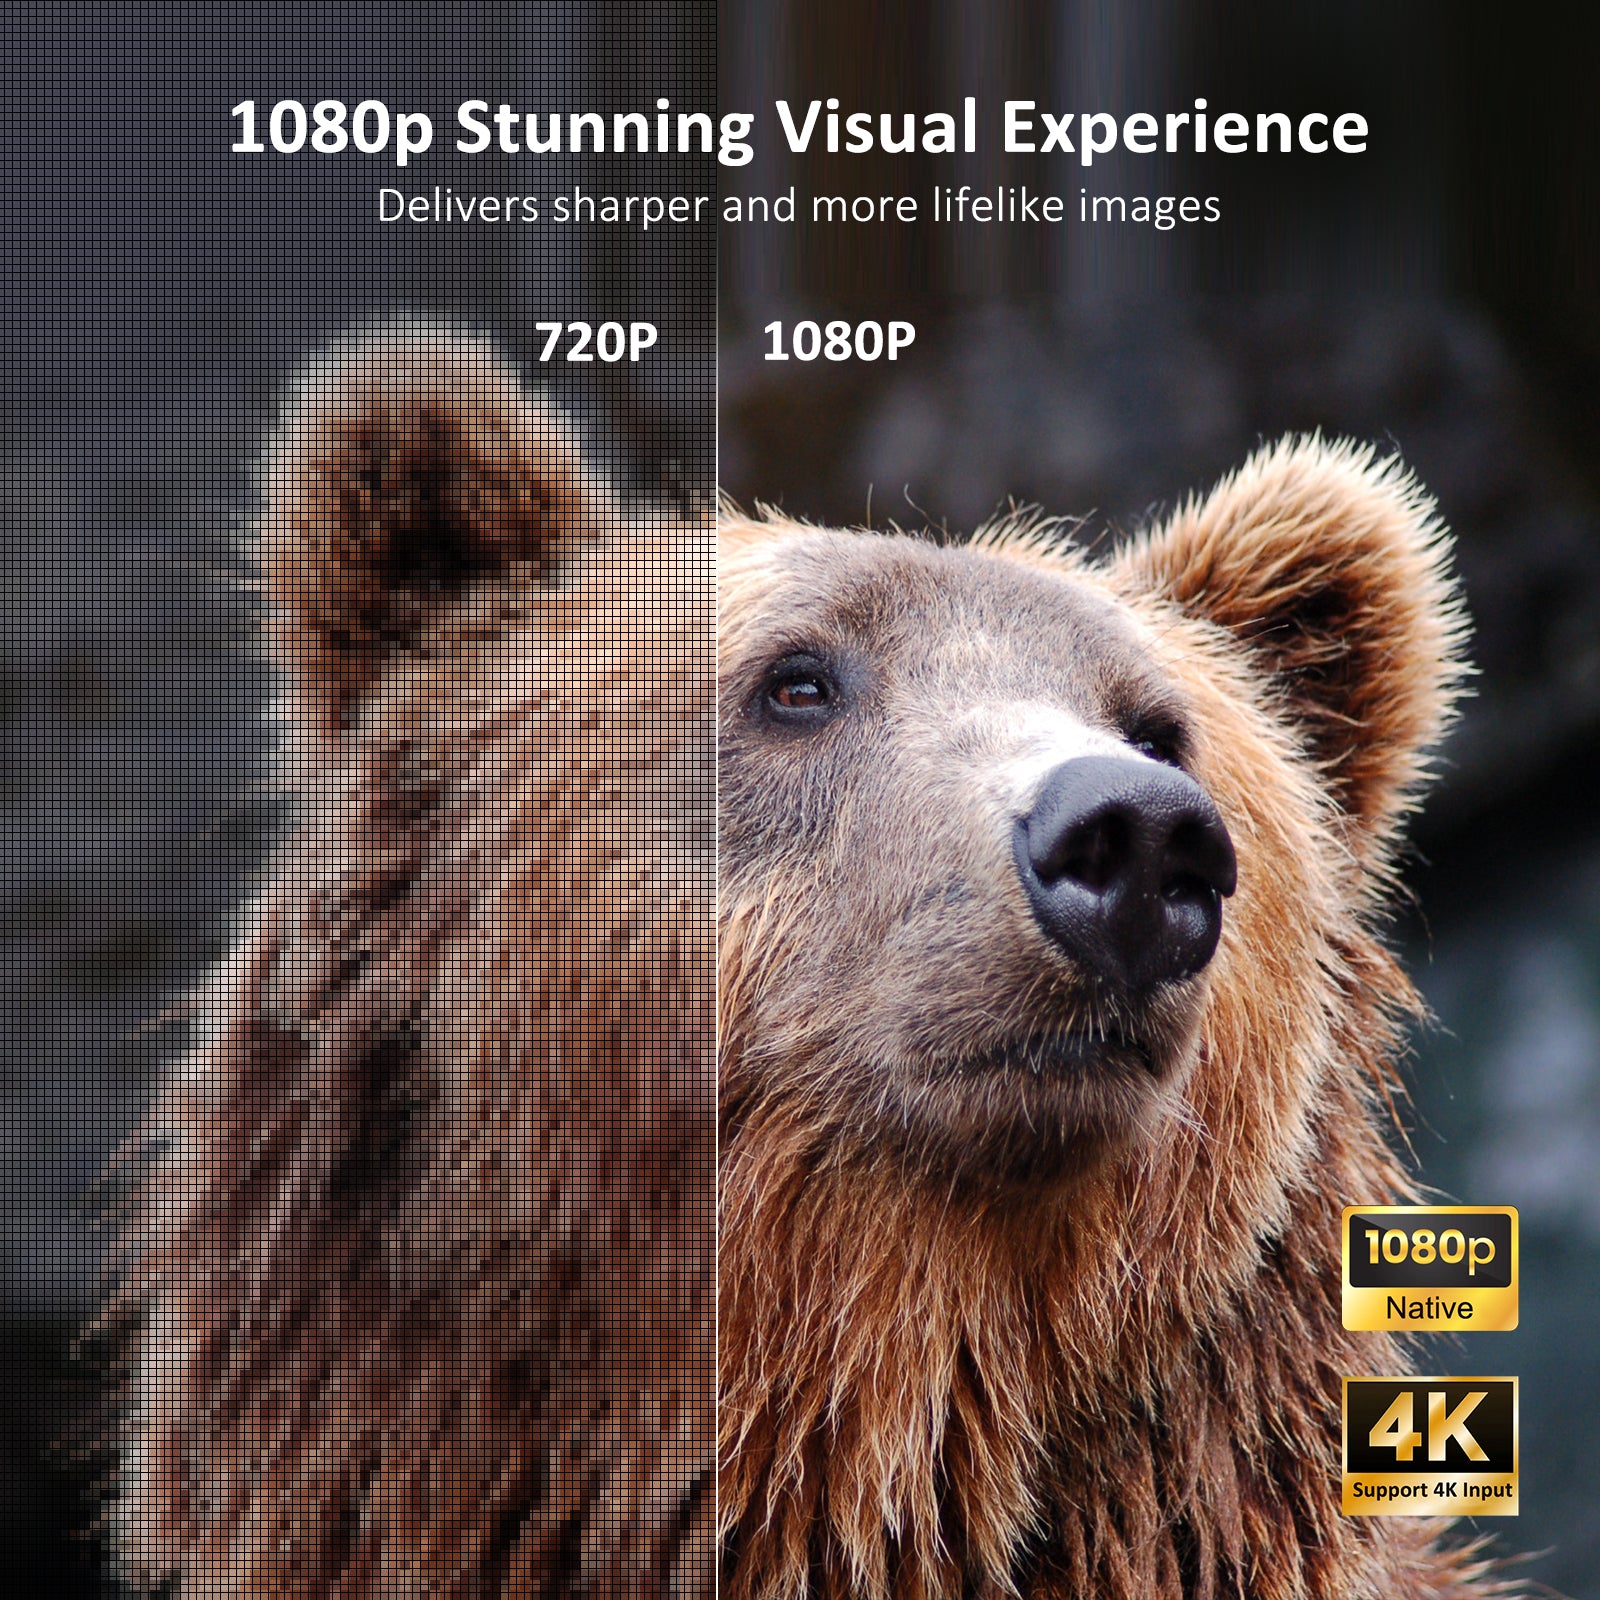 Experience stunning visuals with native 1080P and 4K input support, delivering higher-definition images compared to 720P.